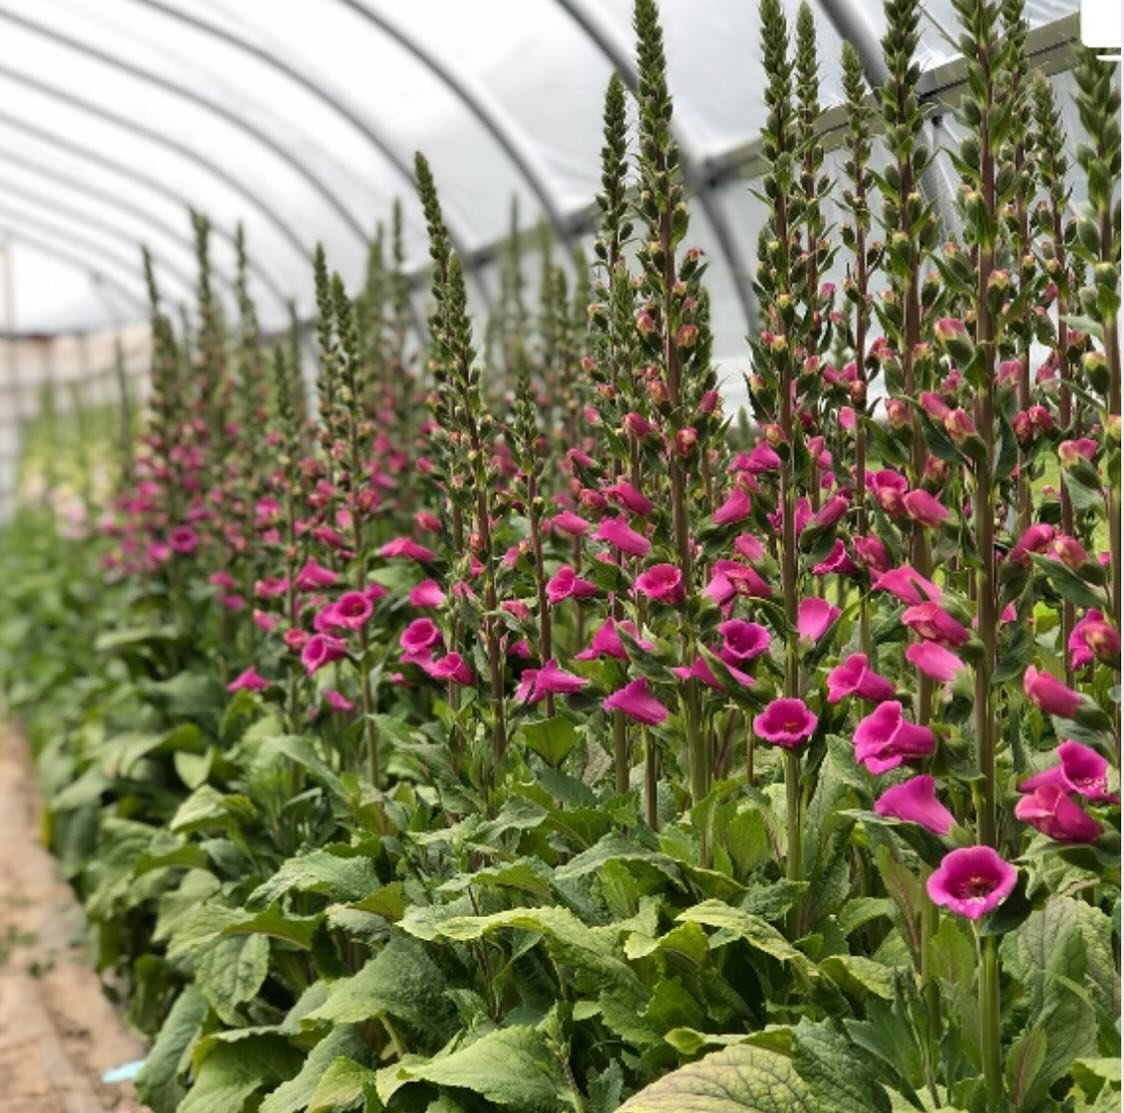 Foxglove have intrigued me now more than ever.  There are so many different varieties and colors that enable them to be popular for as long as the season will allow.

I was so glad the Anna Jane from @littlestateflowerco shared so much about how she 